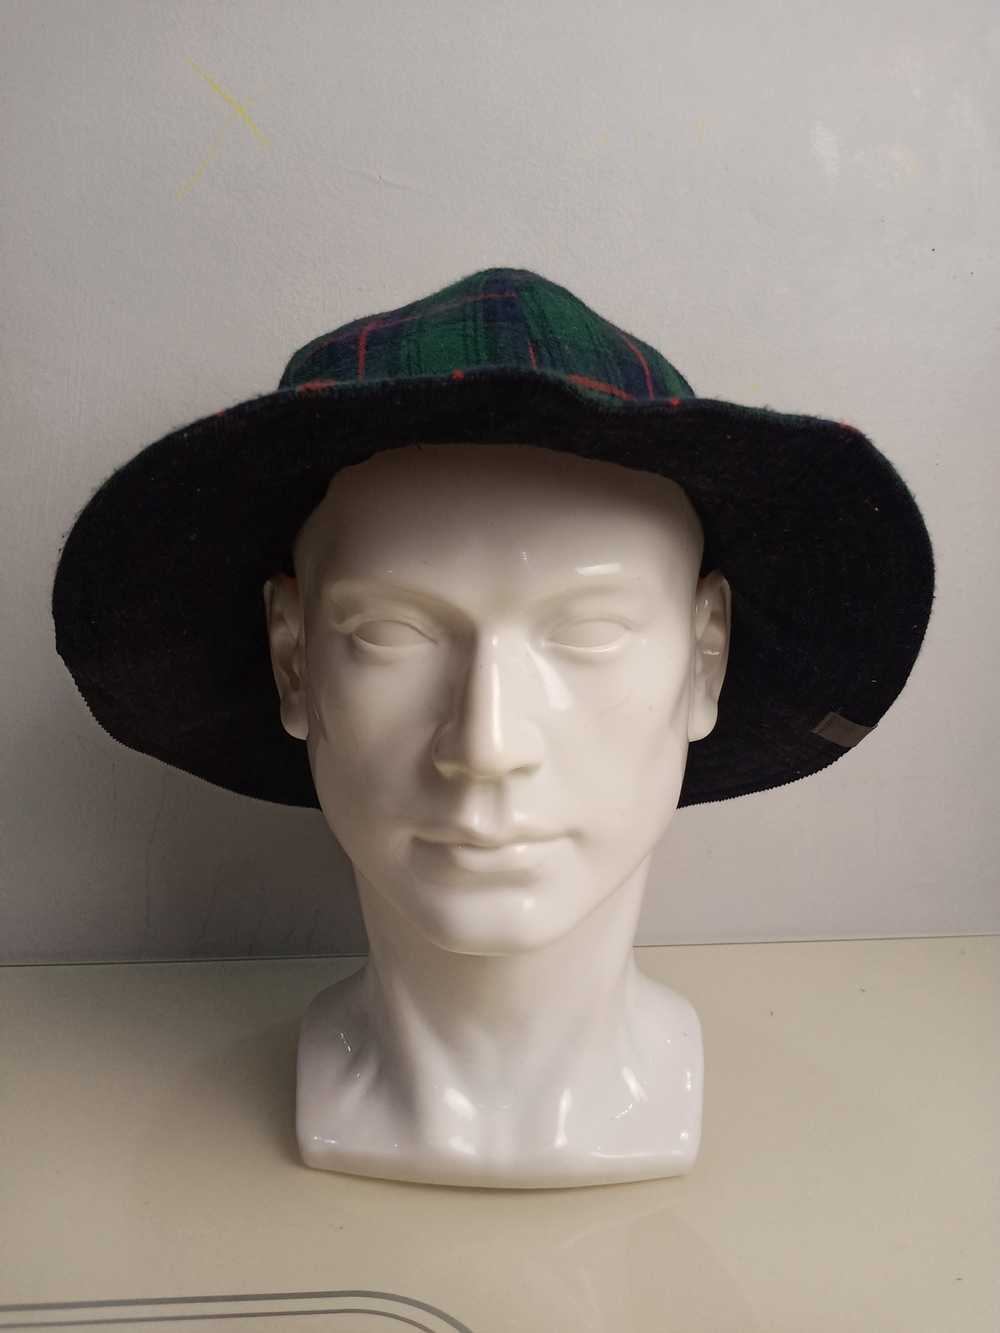 Other × Streetwear Unbranded Riversible Hat - image 5